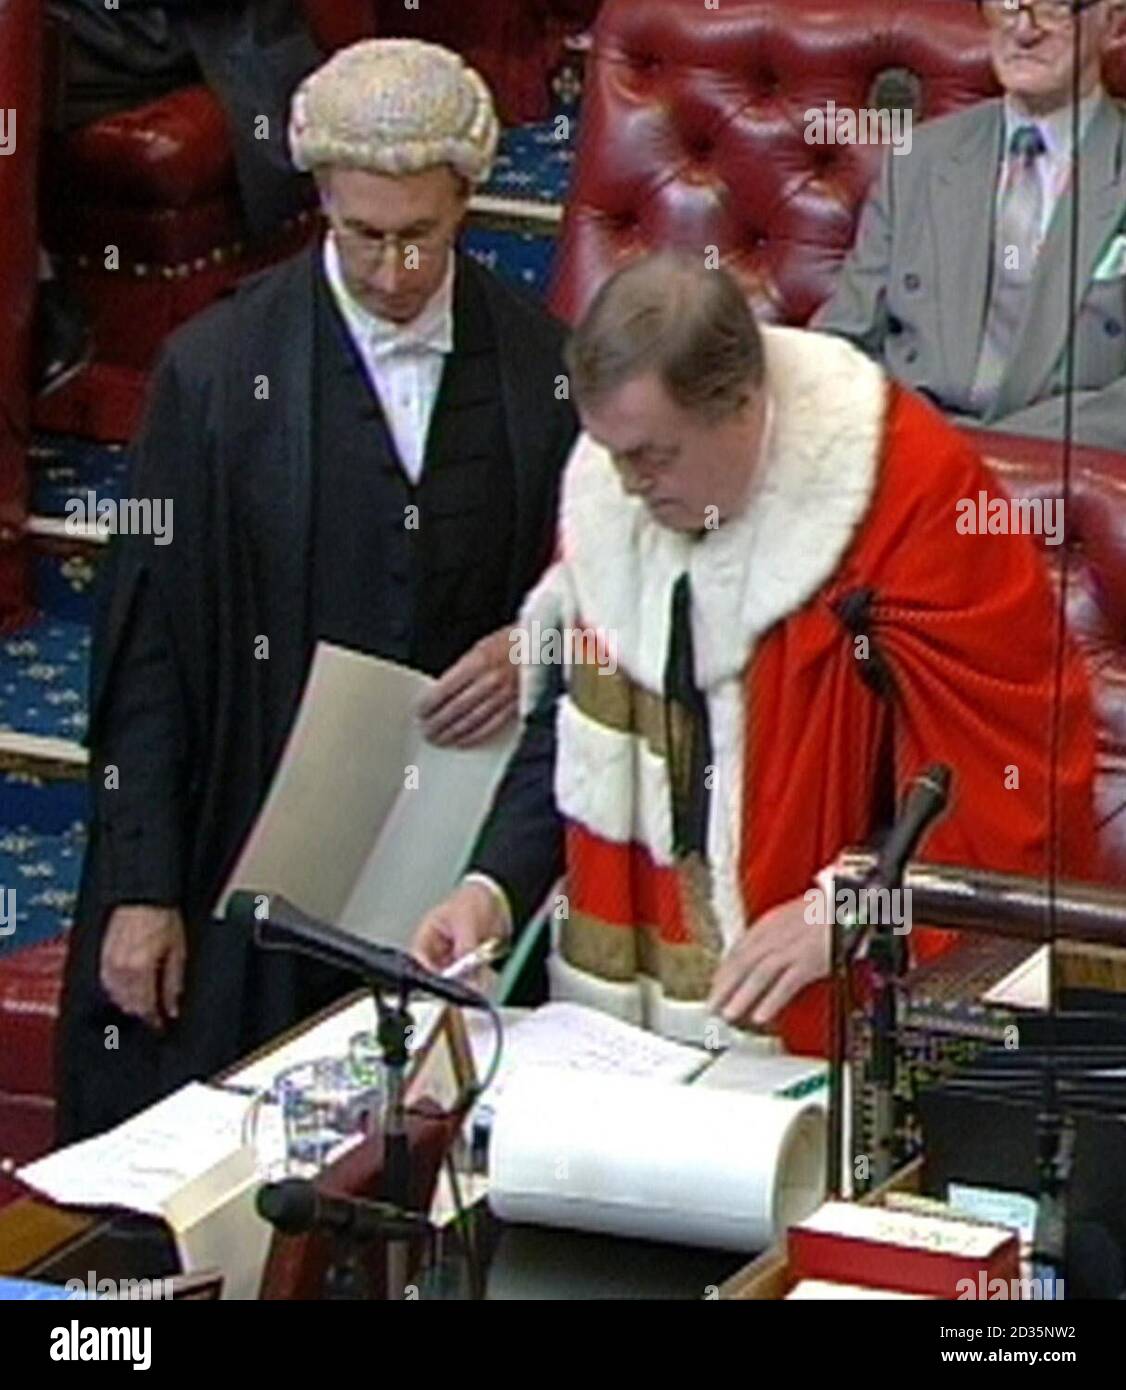 John Prescott is introduced to the House of Lords in London, taking on the title of Baron Prescott of Kingston-upon-Hull. Stock Photo